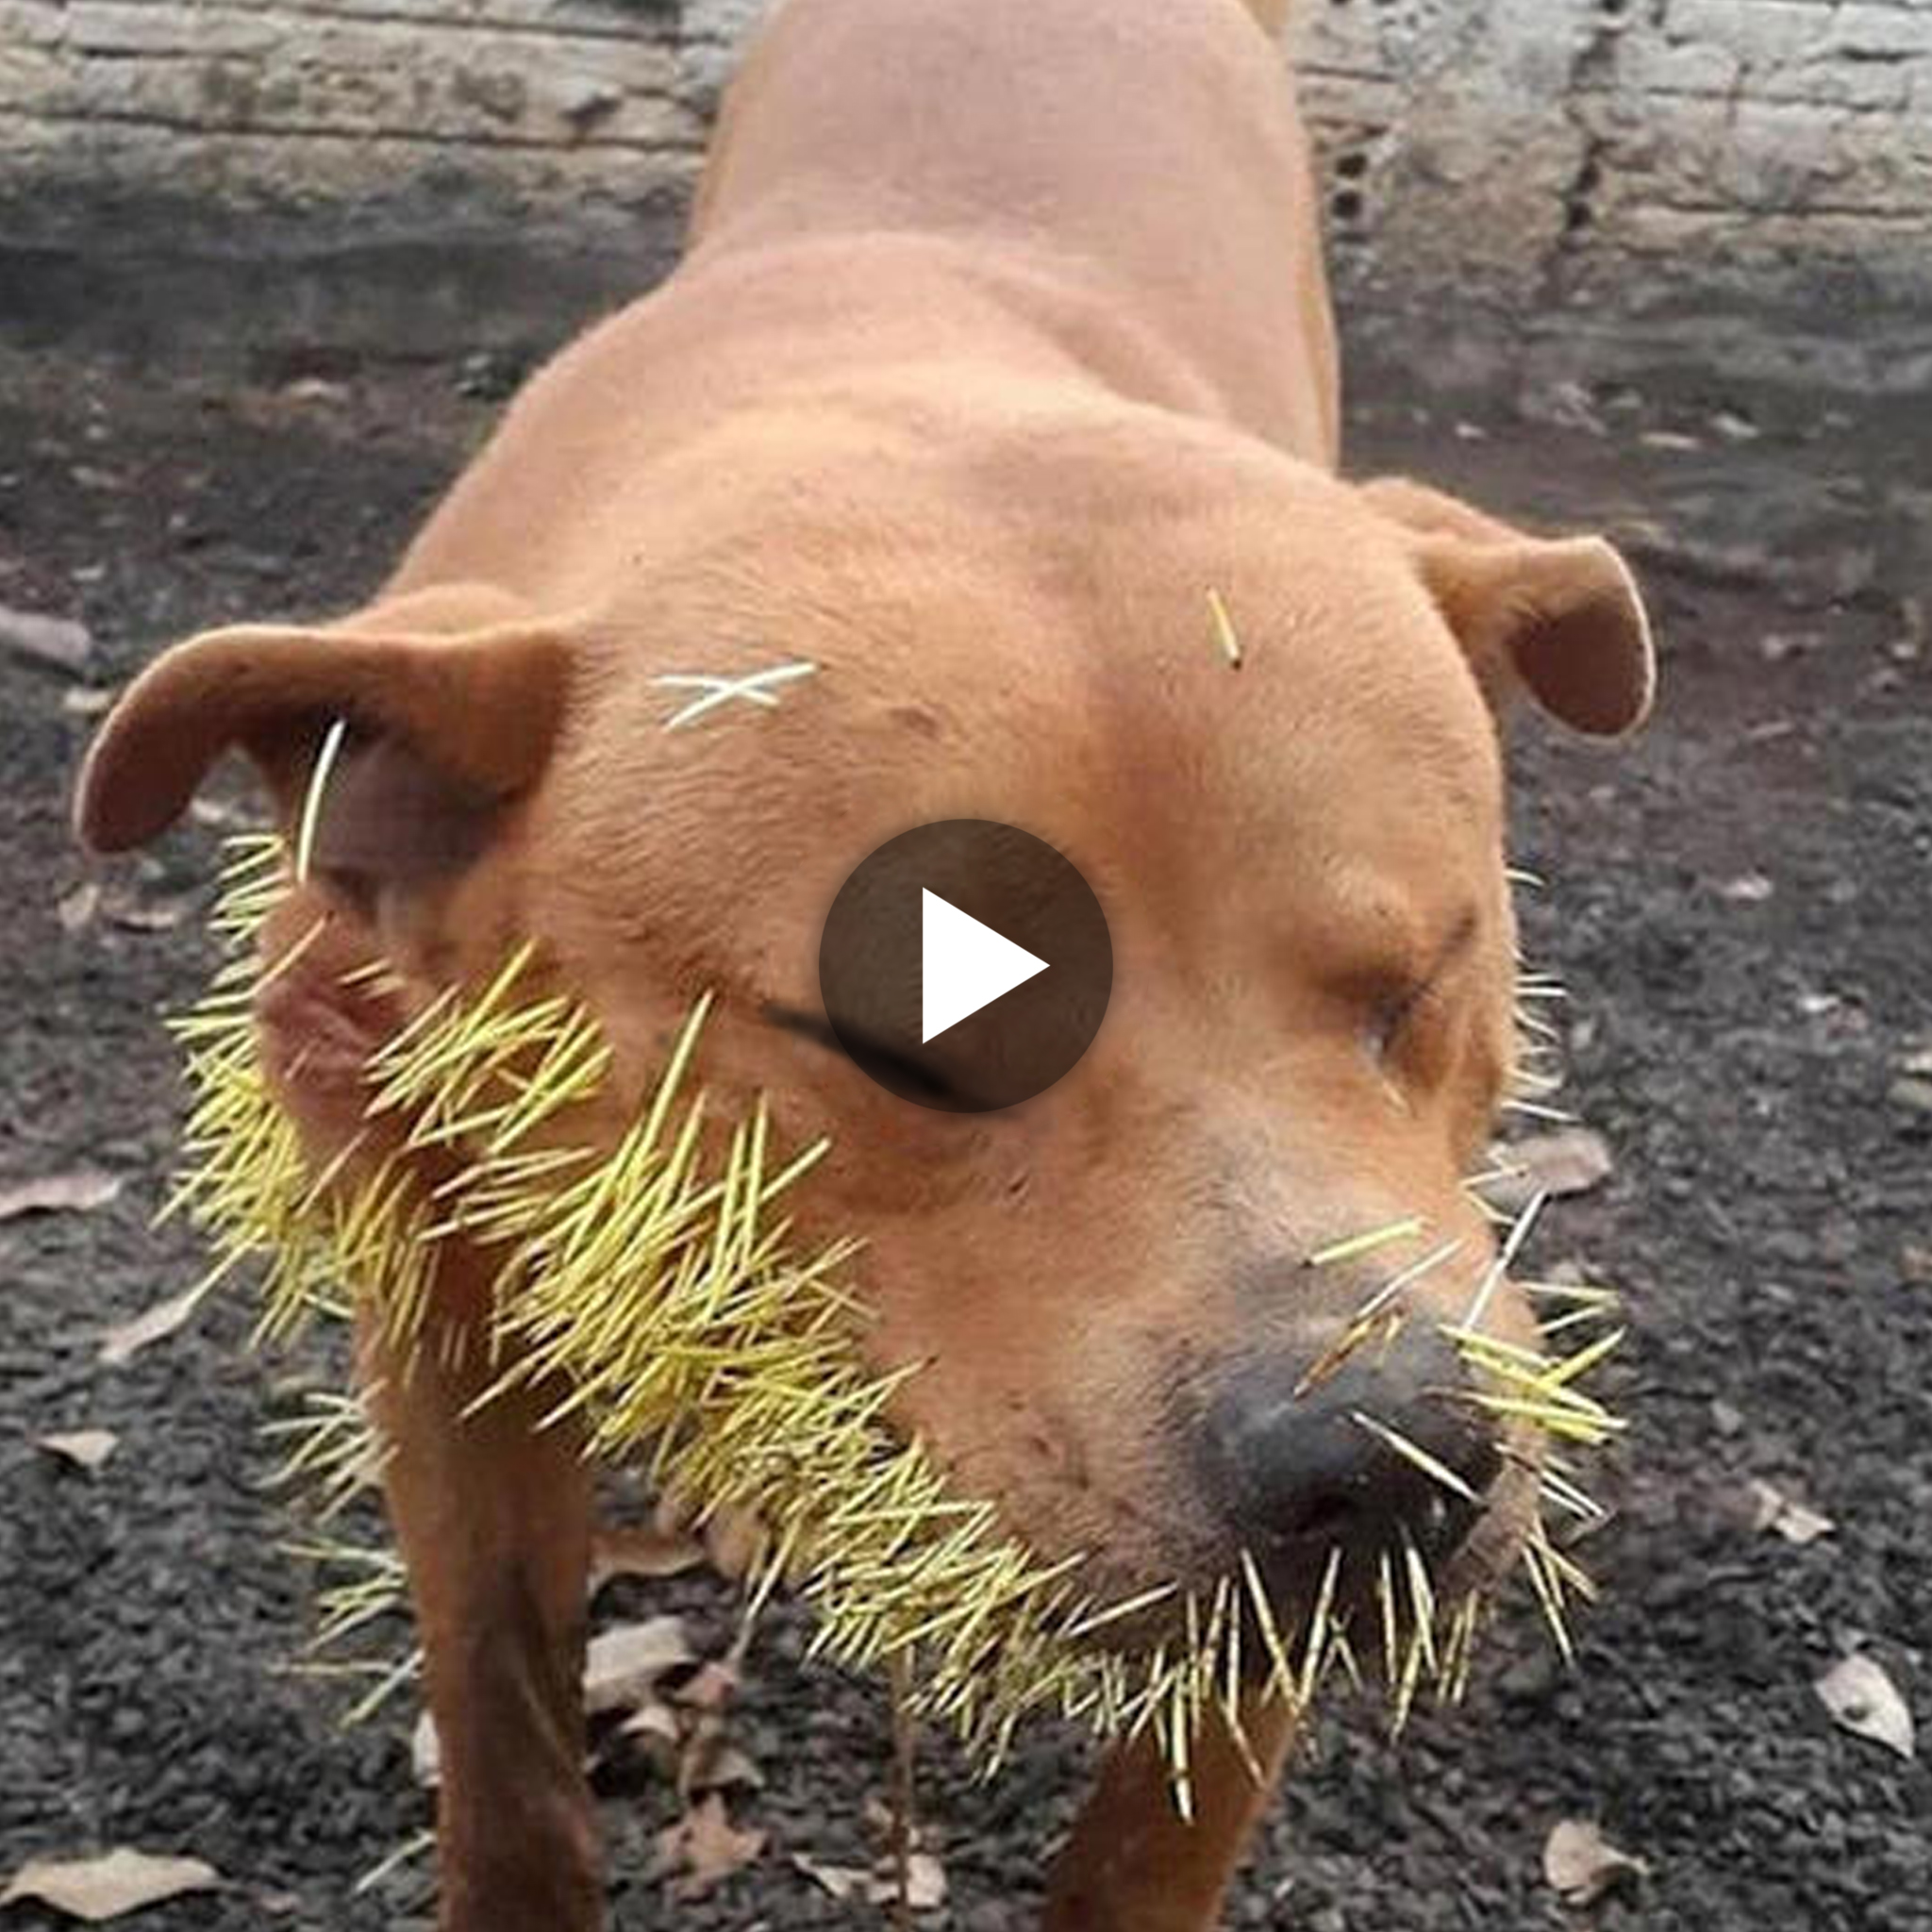 Depicting the Tragic Tale of a Treasured Pet Dog Suffering from Several Porcupine Quills, Resonating with Prolonged Cries of Pain.